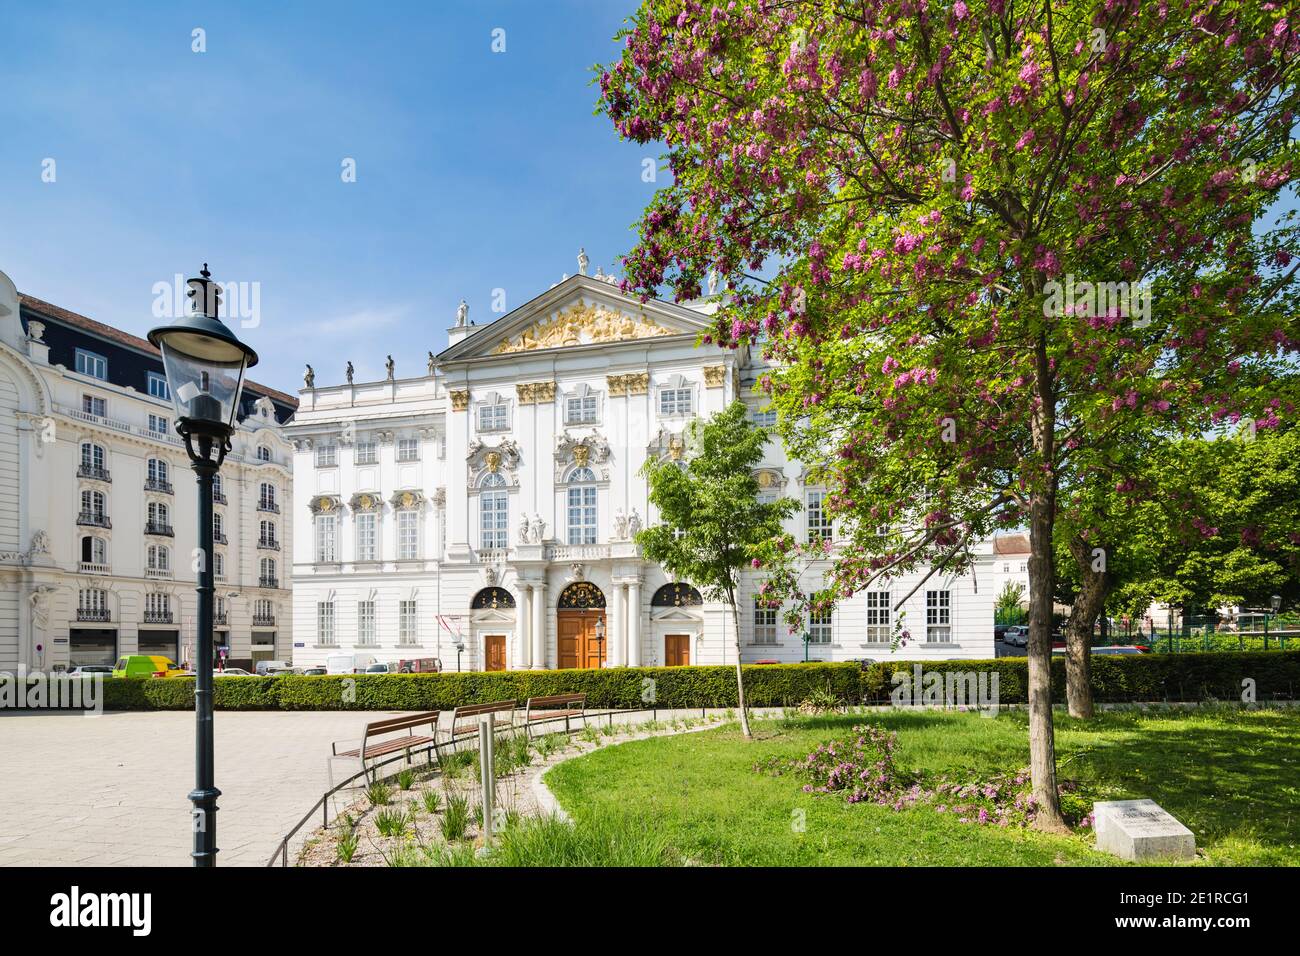 View of the Federal Ministry of Justice (Bundesministerium für Justiz), Vienna, Austria in the Palais Trautson. Stock Photo